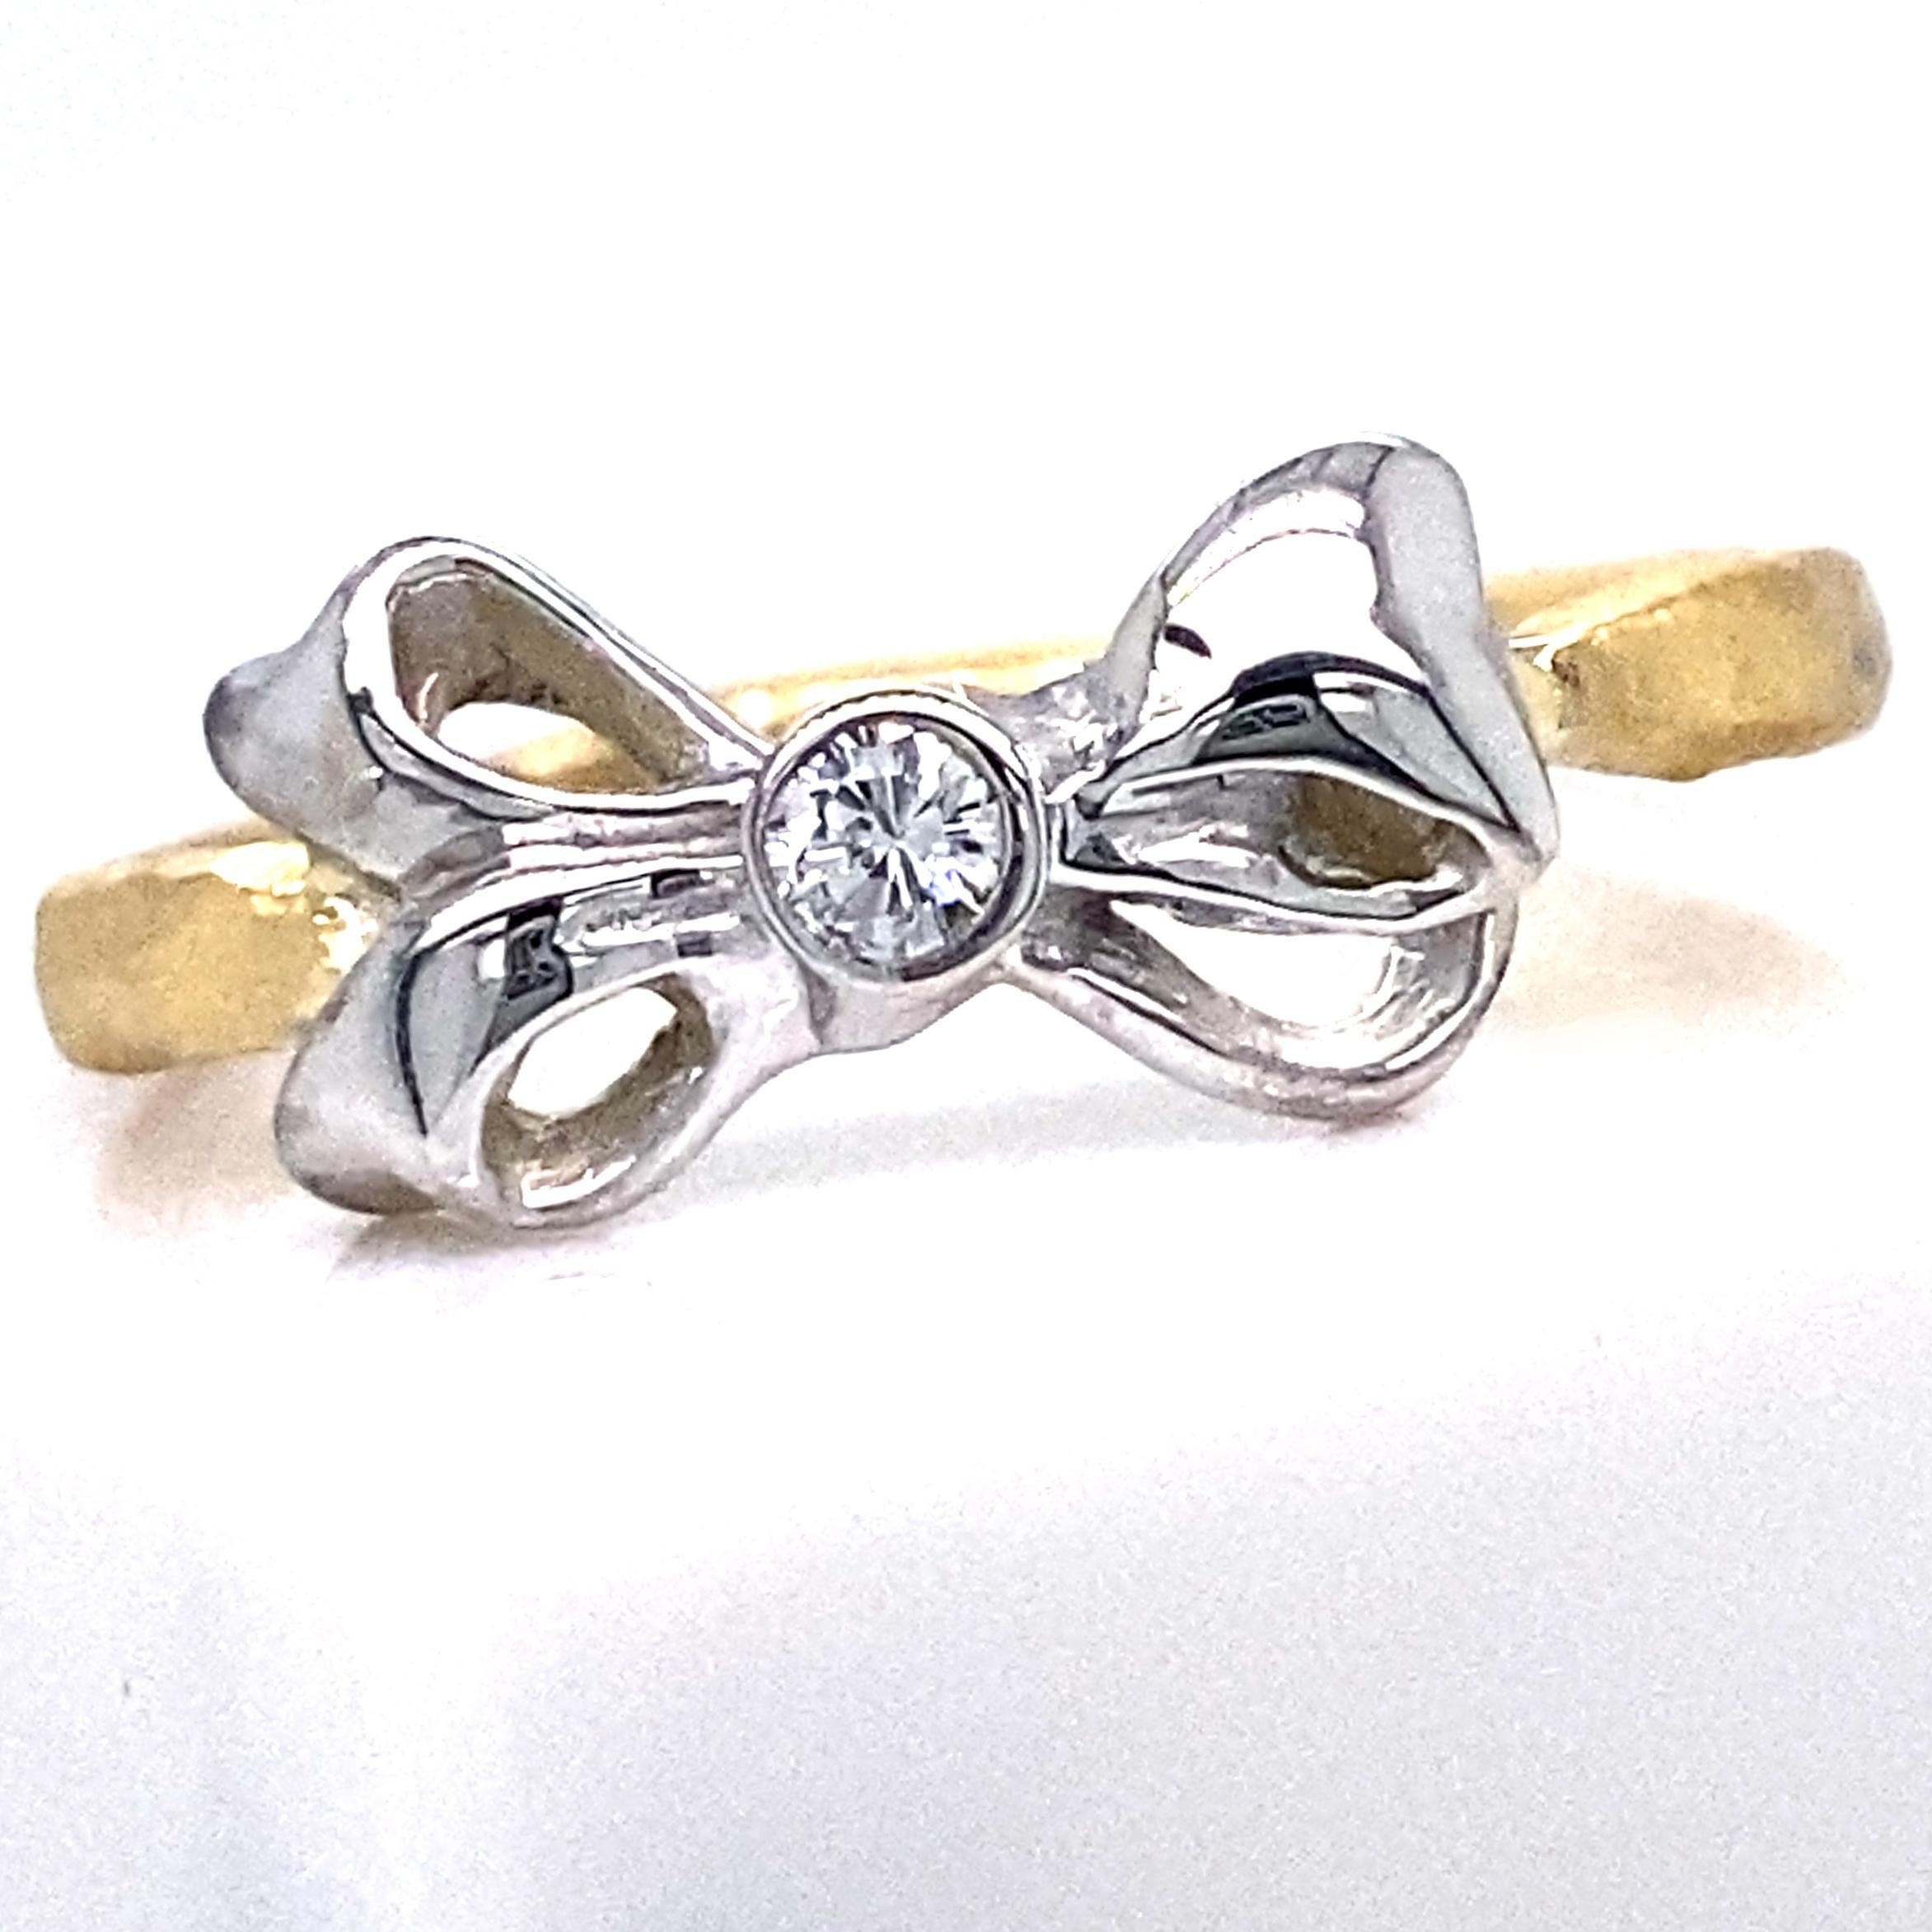 Eytan Brandes has been making this adorable little ring for years, in various combinations of precious metals, with or without diamonds in the center.

This particular ring has a hammered 18 karat yellow gold band with a shimmery satin finish.  The